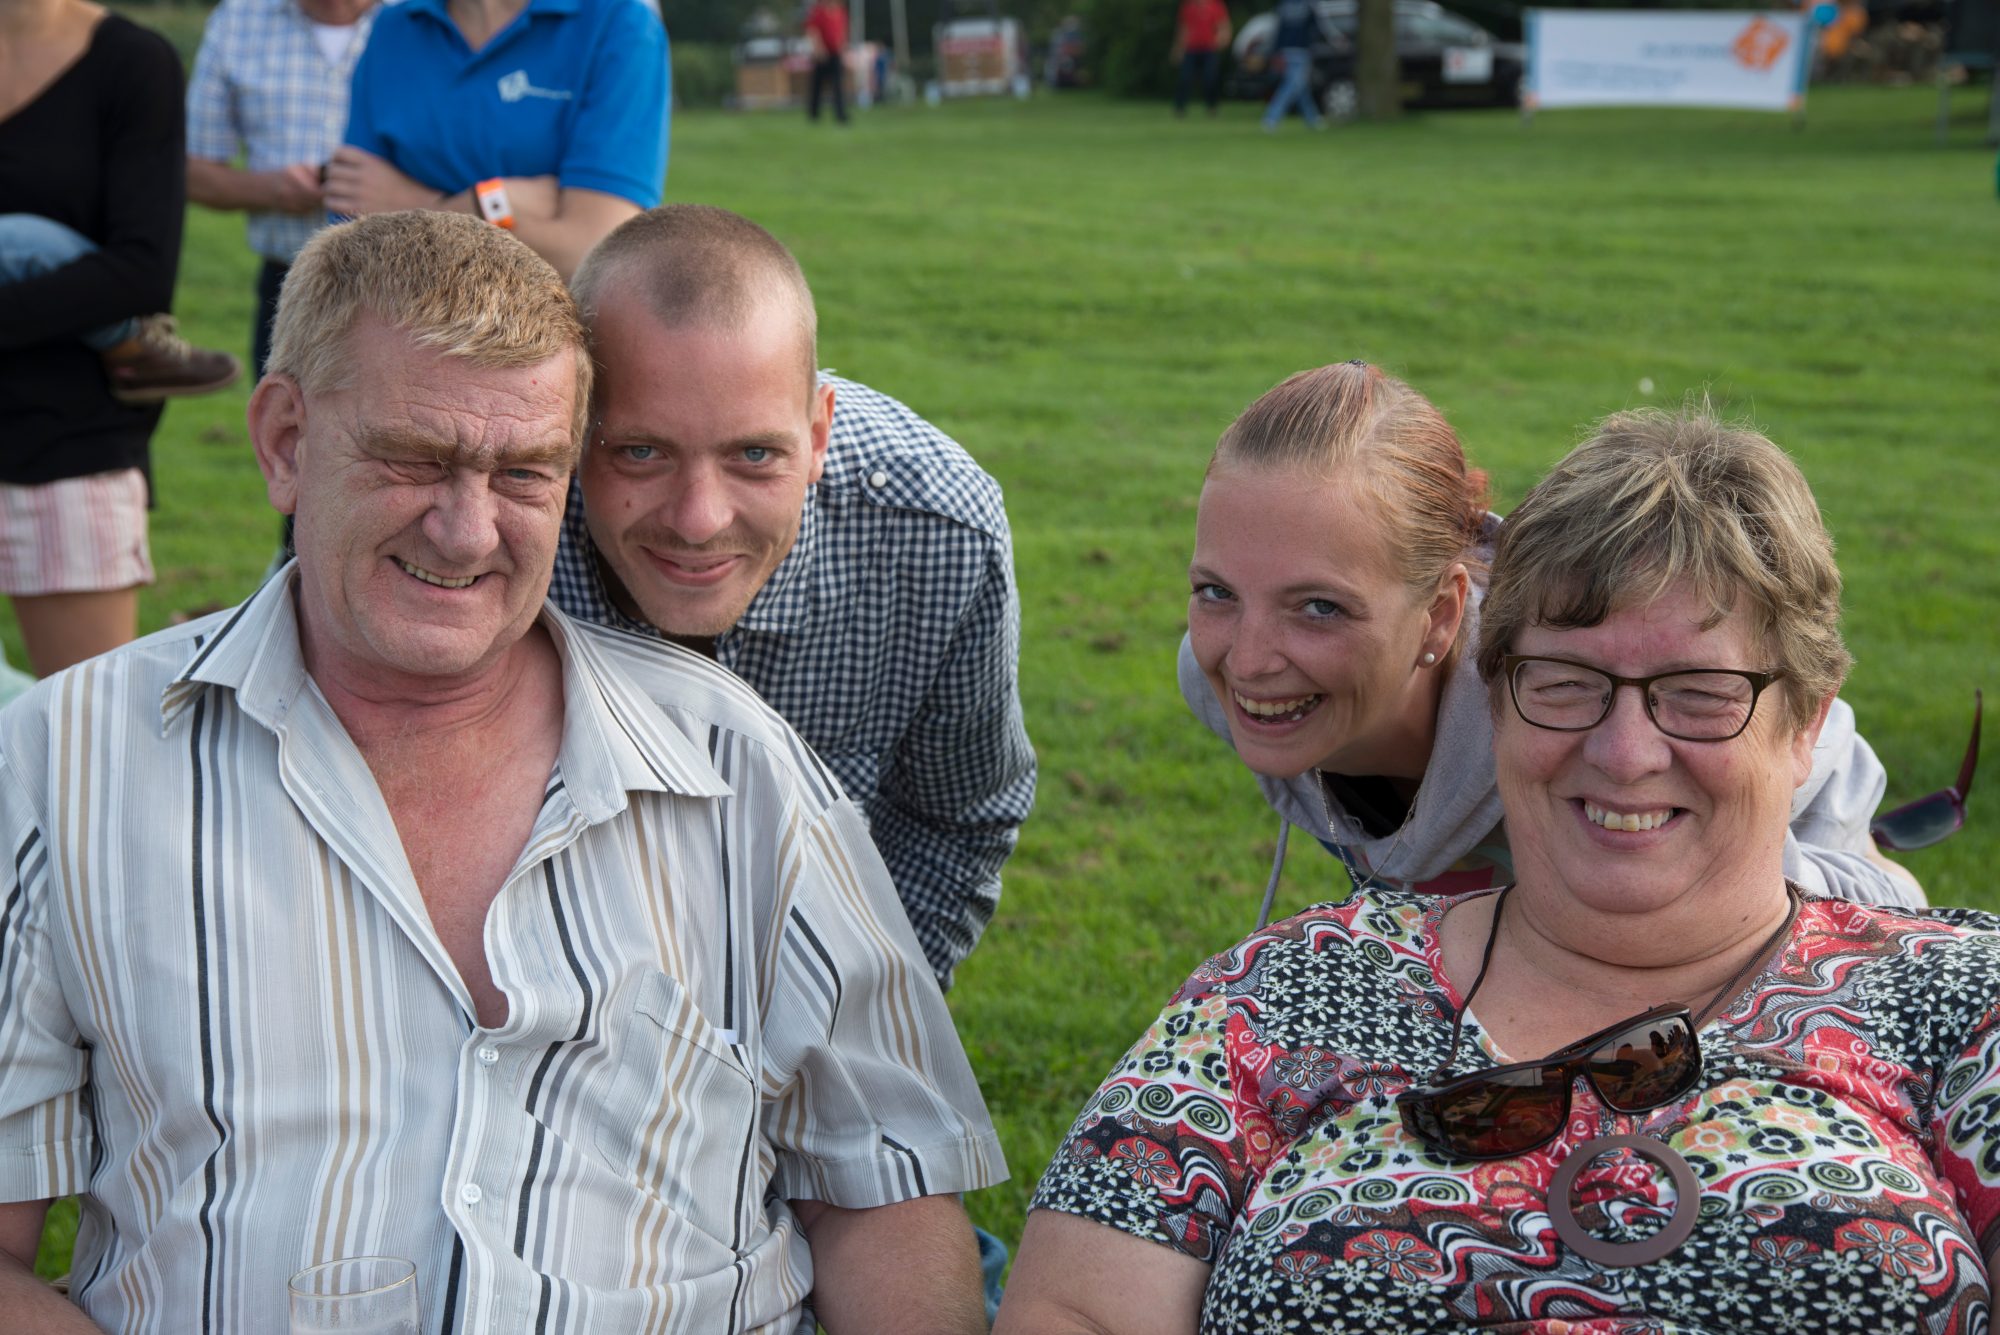 Topsport for Life - Zomerfeest 2014 - 14